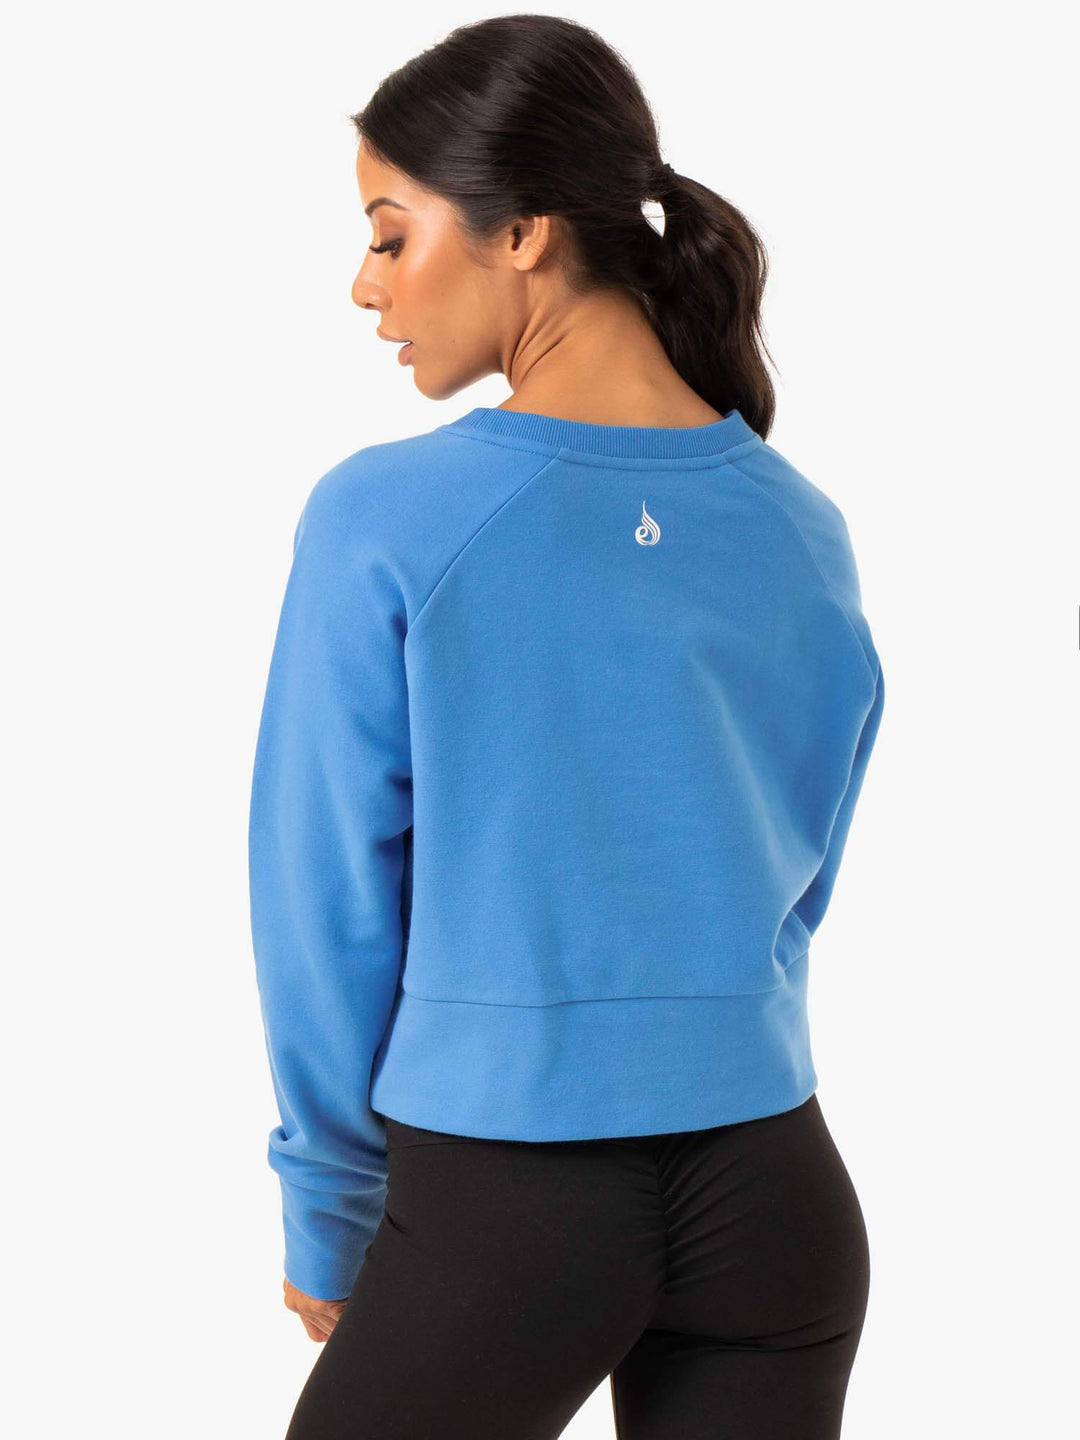 Motion Sweater - Blue Clothing Ryderwear 